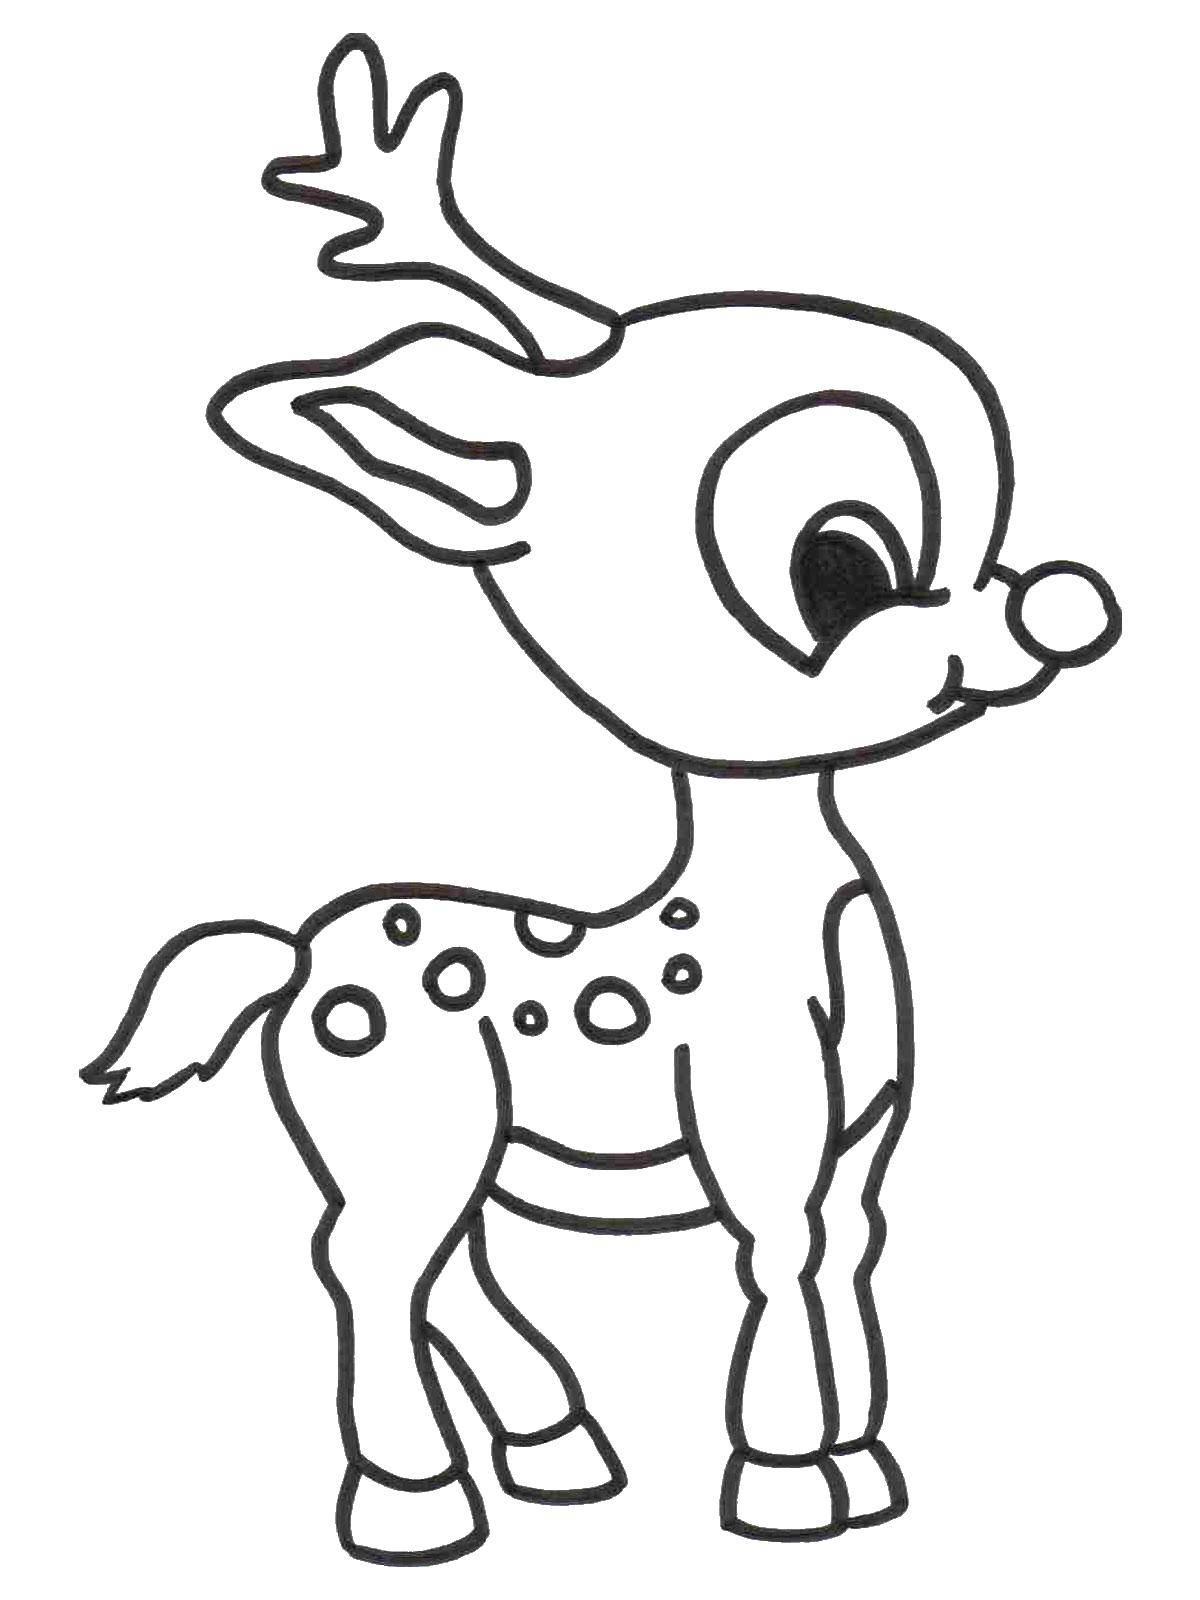 Coloring Little fawn. Category animals. Tags:  fawn.